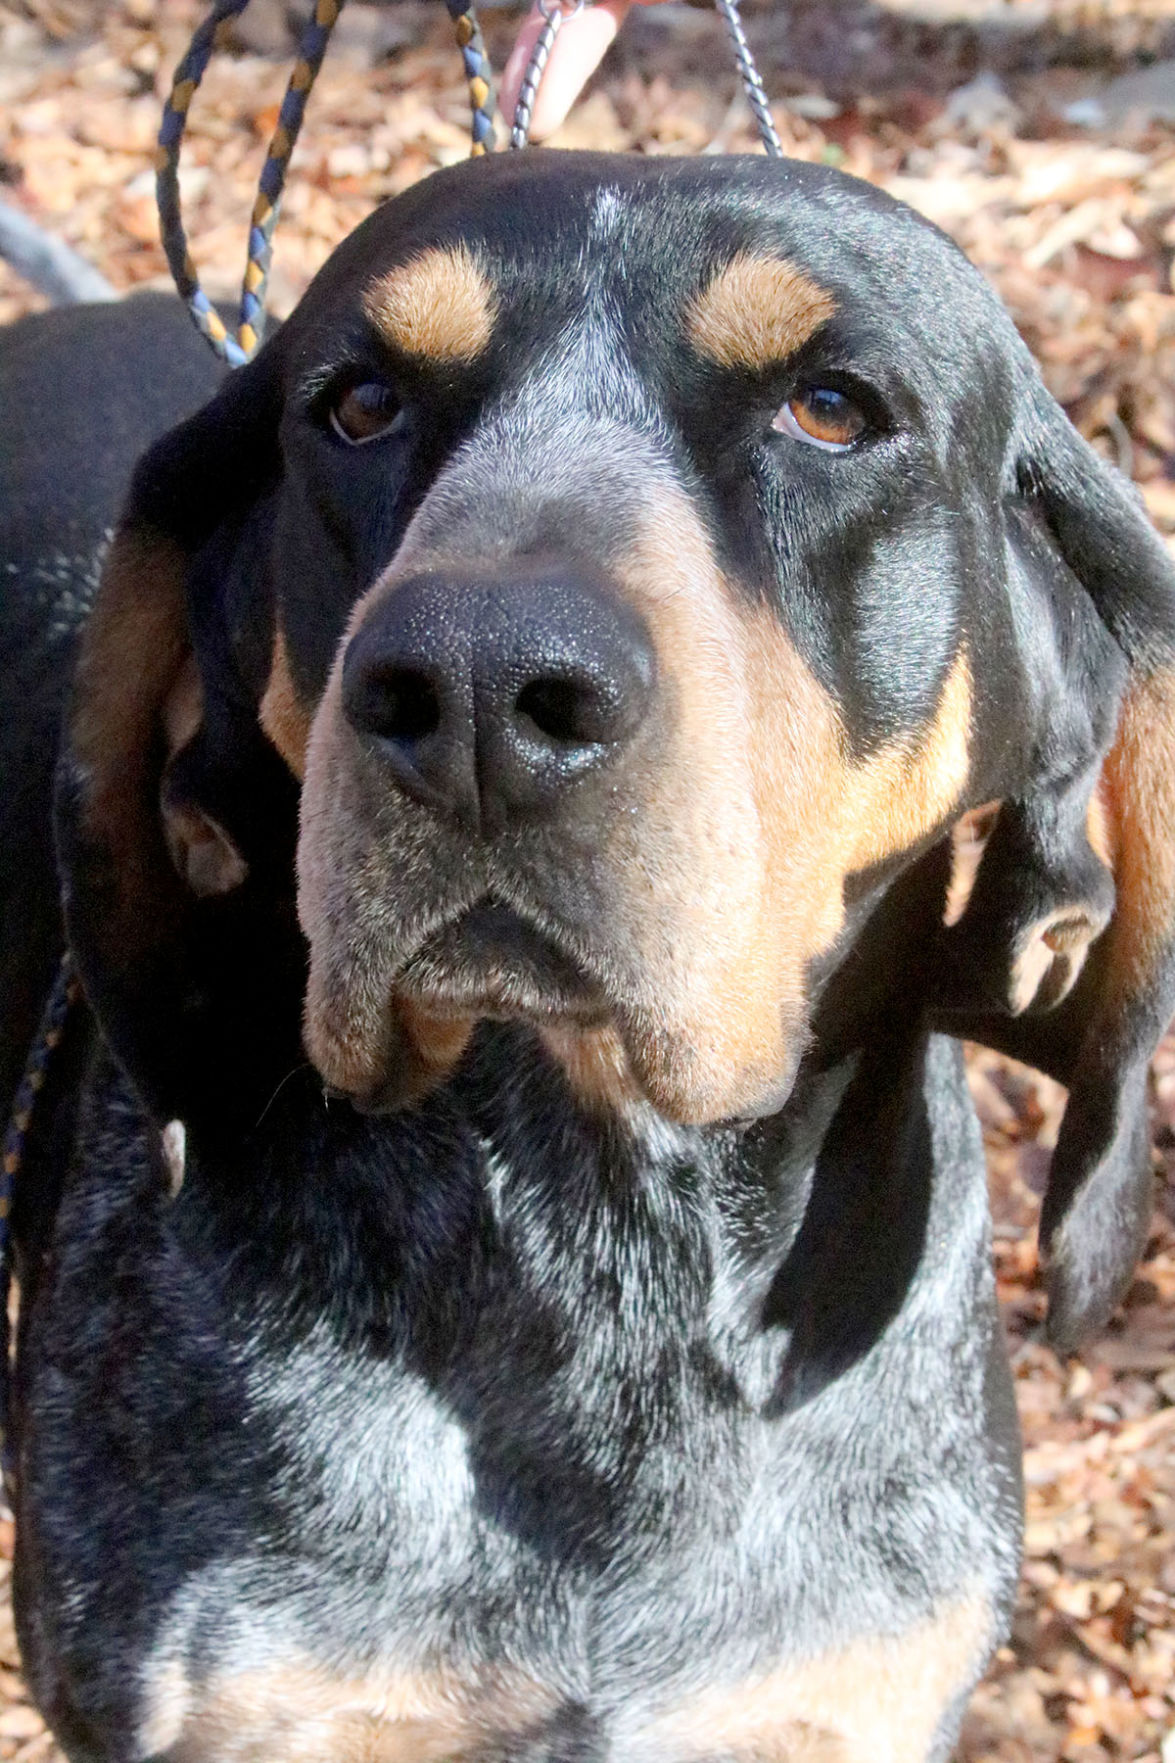 Noah A Bluetick Coonhound From Ragland Headed To Westminster Dog Show The St Clair Times Annistonstar Com,Lychee Fruit Images